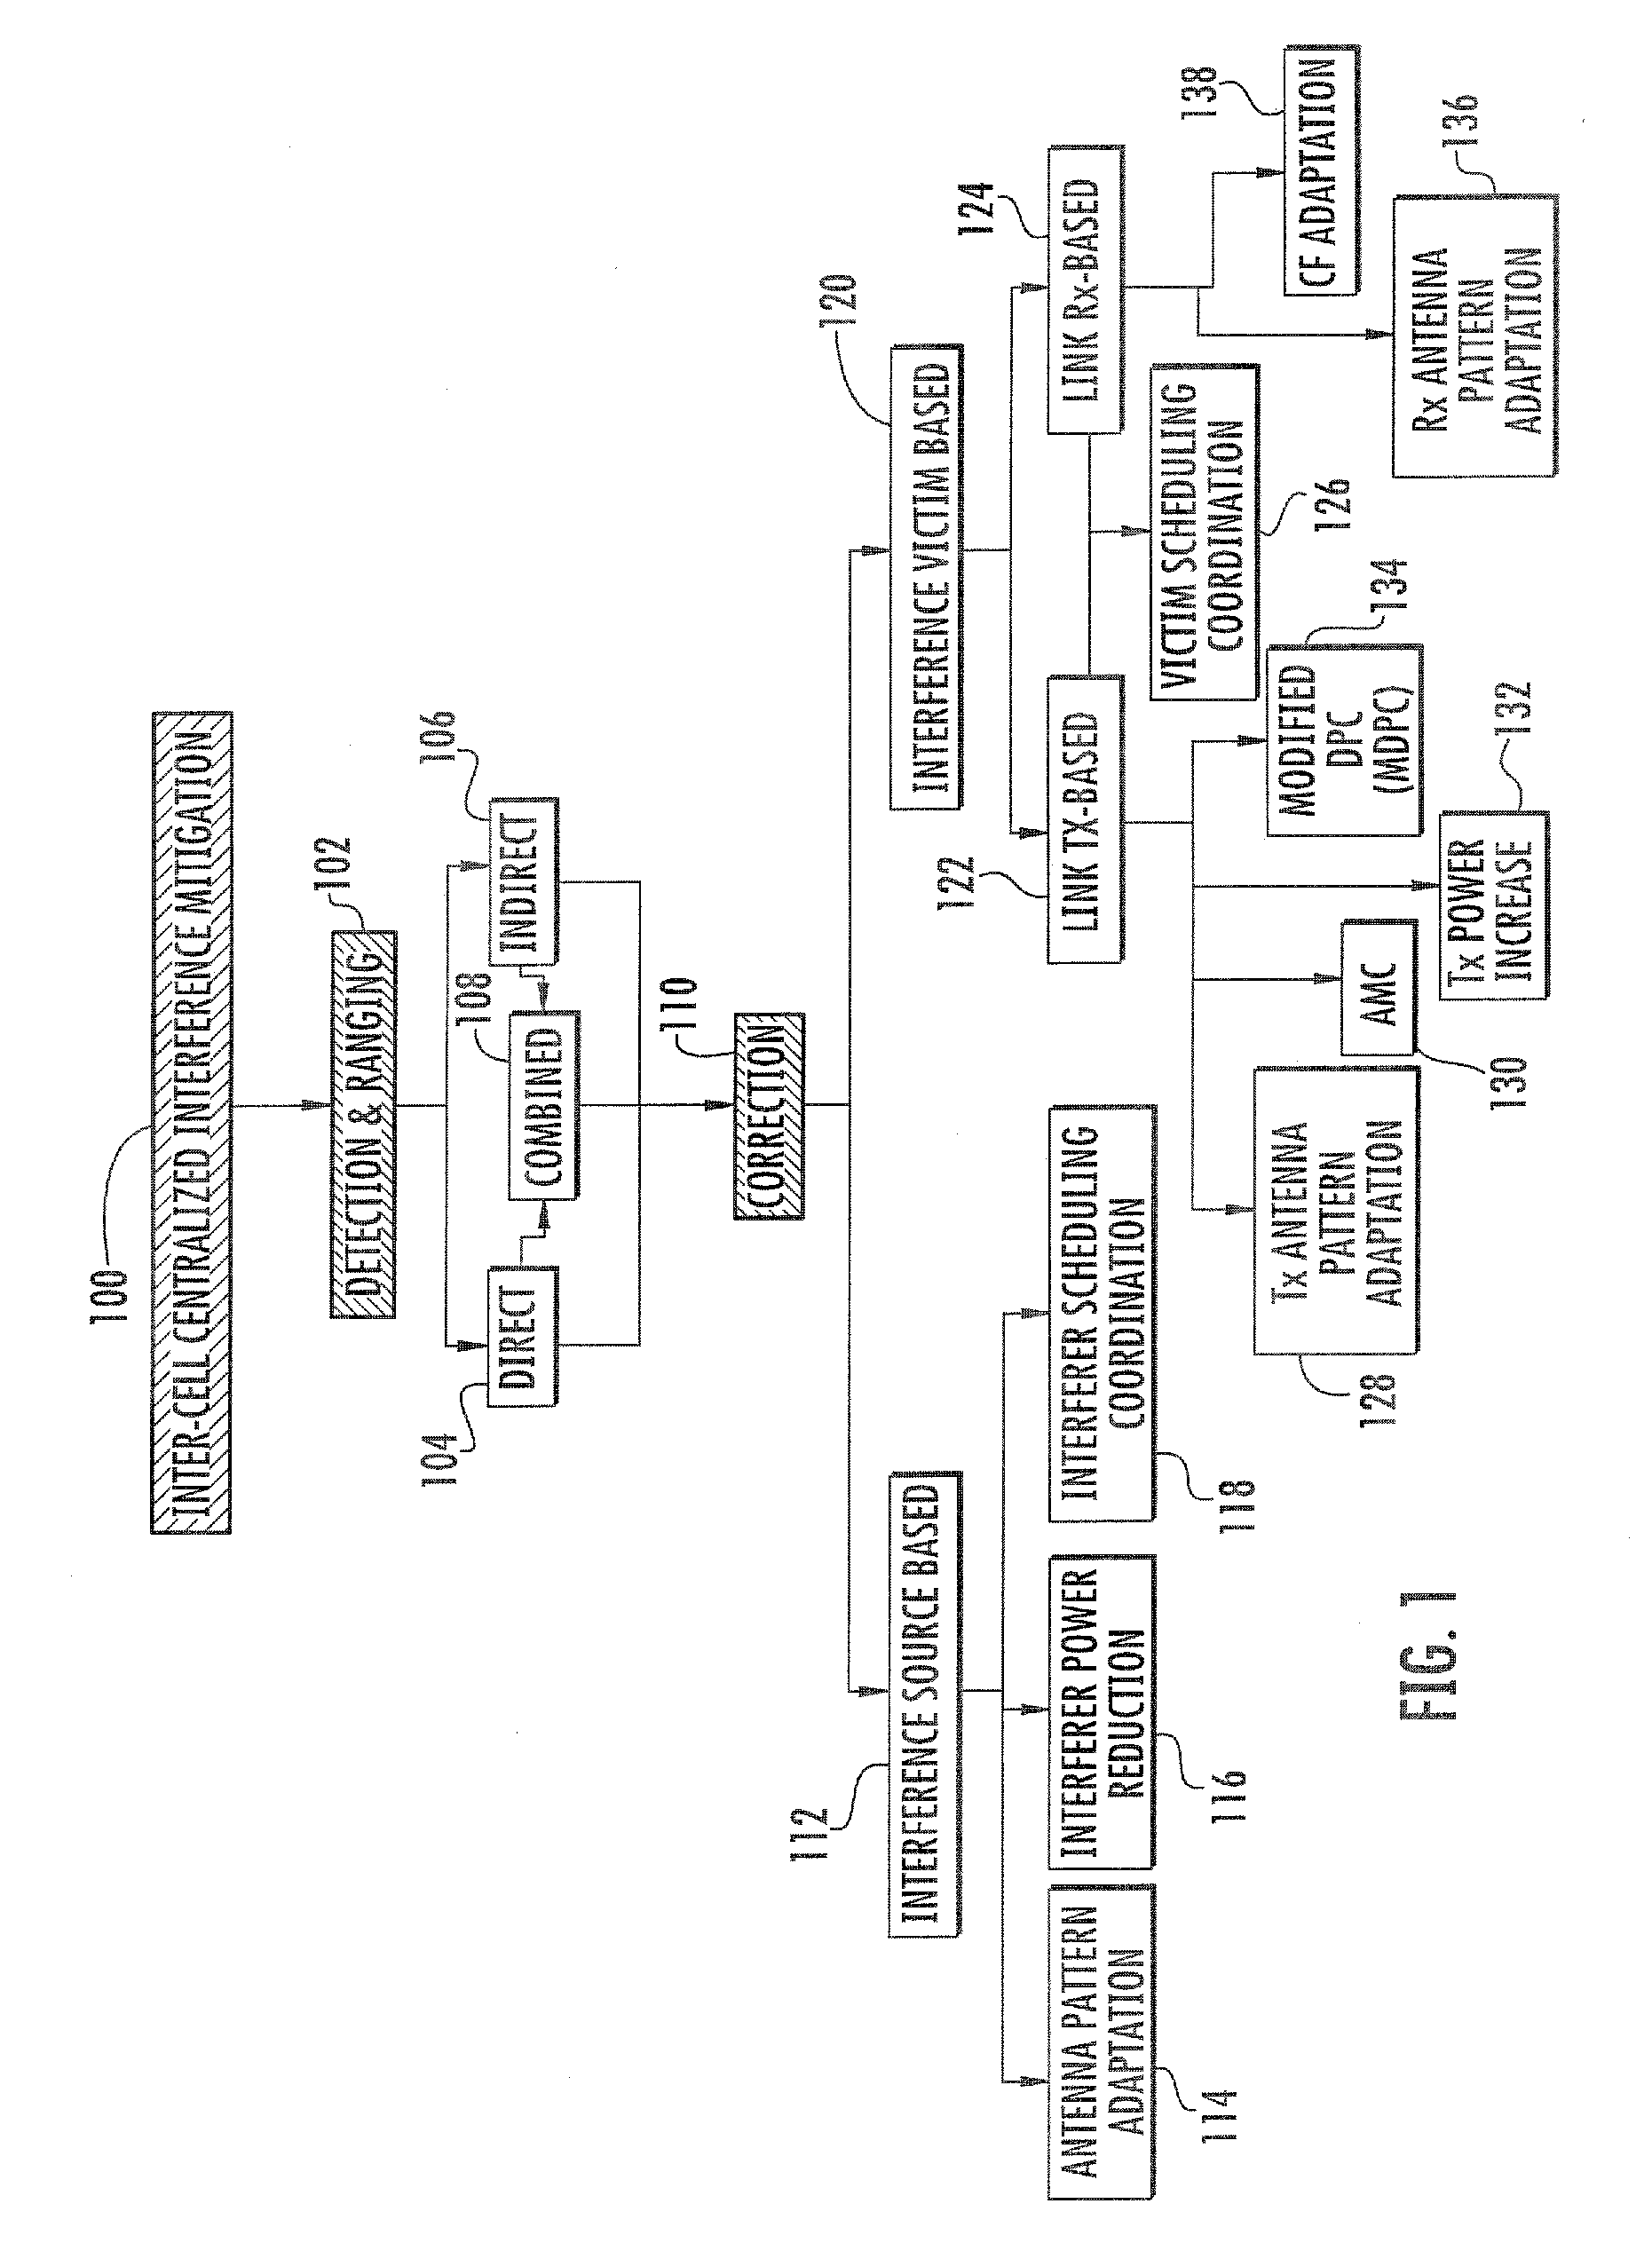 Methods and apparatus for centralized and coordinated interference mitigation in a WLAN network